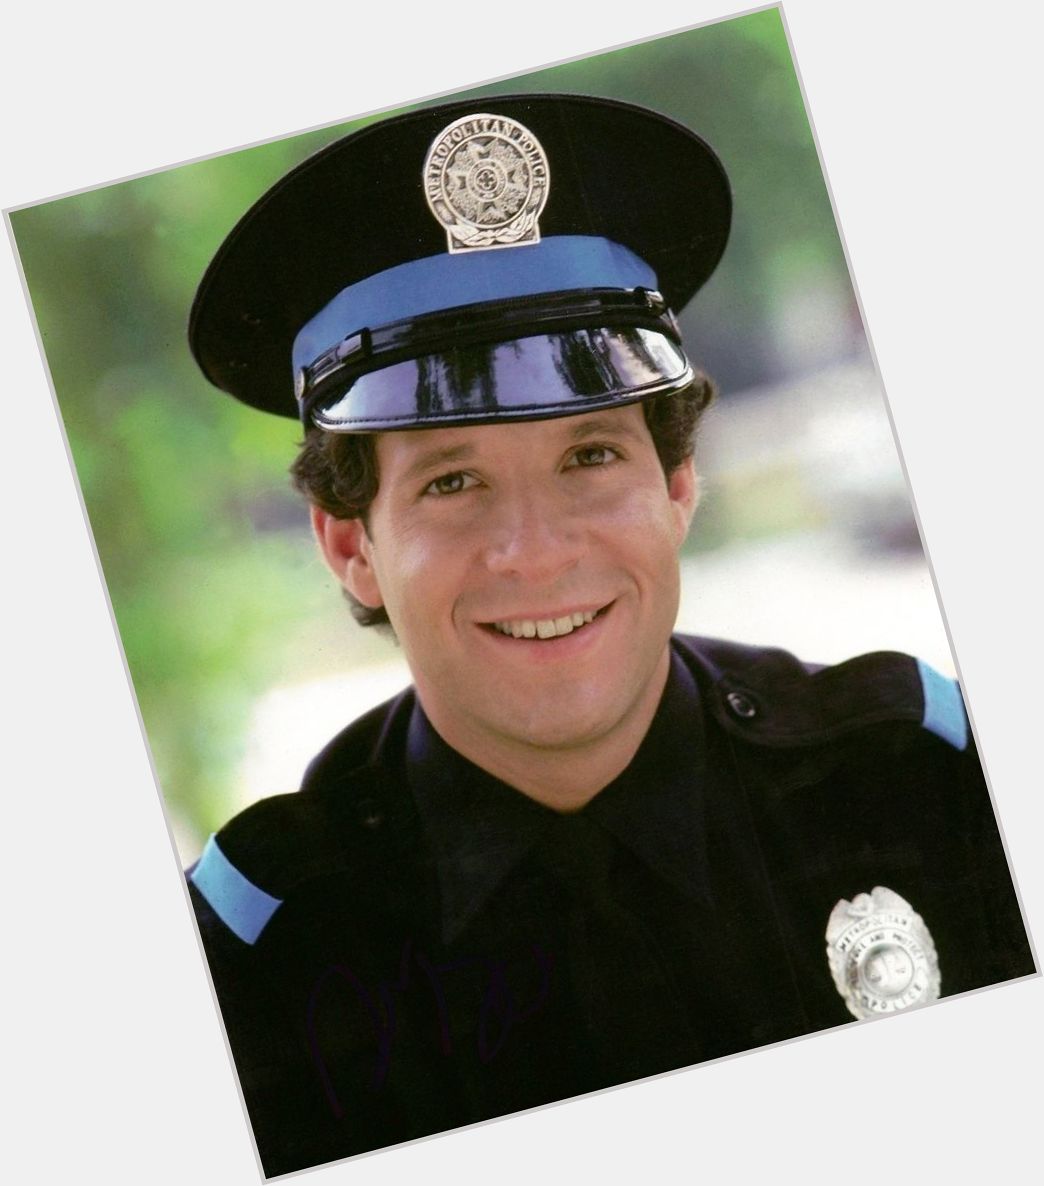 Happy Birthday to the great Steve Guttenberg! Always thinking of him and missing him in movies. 